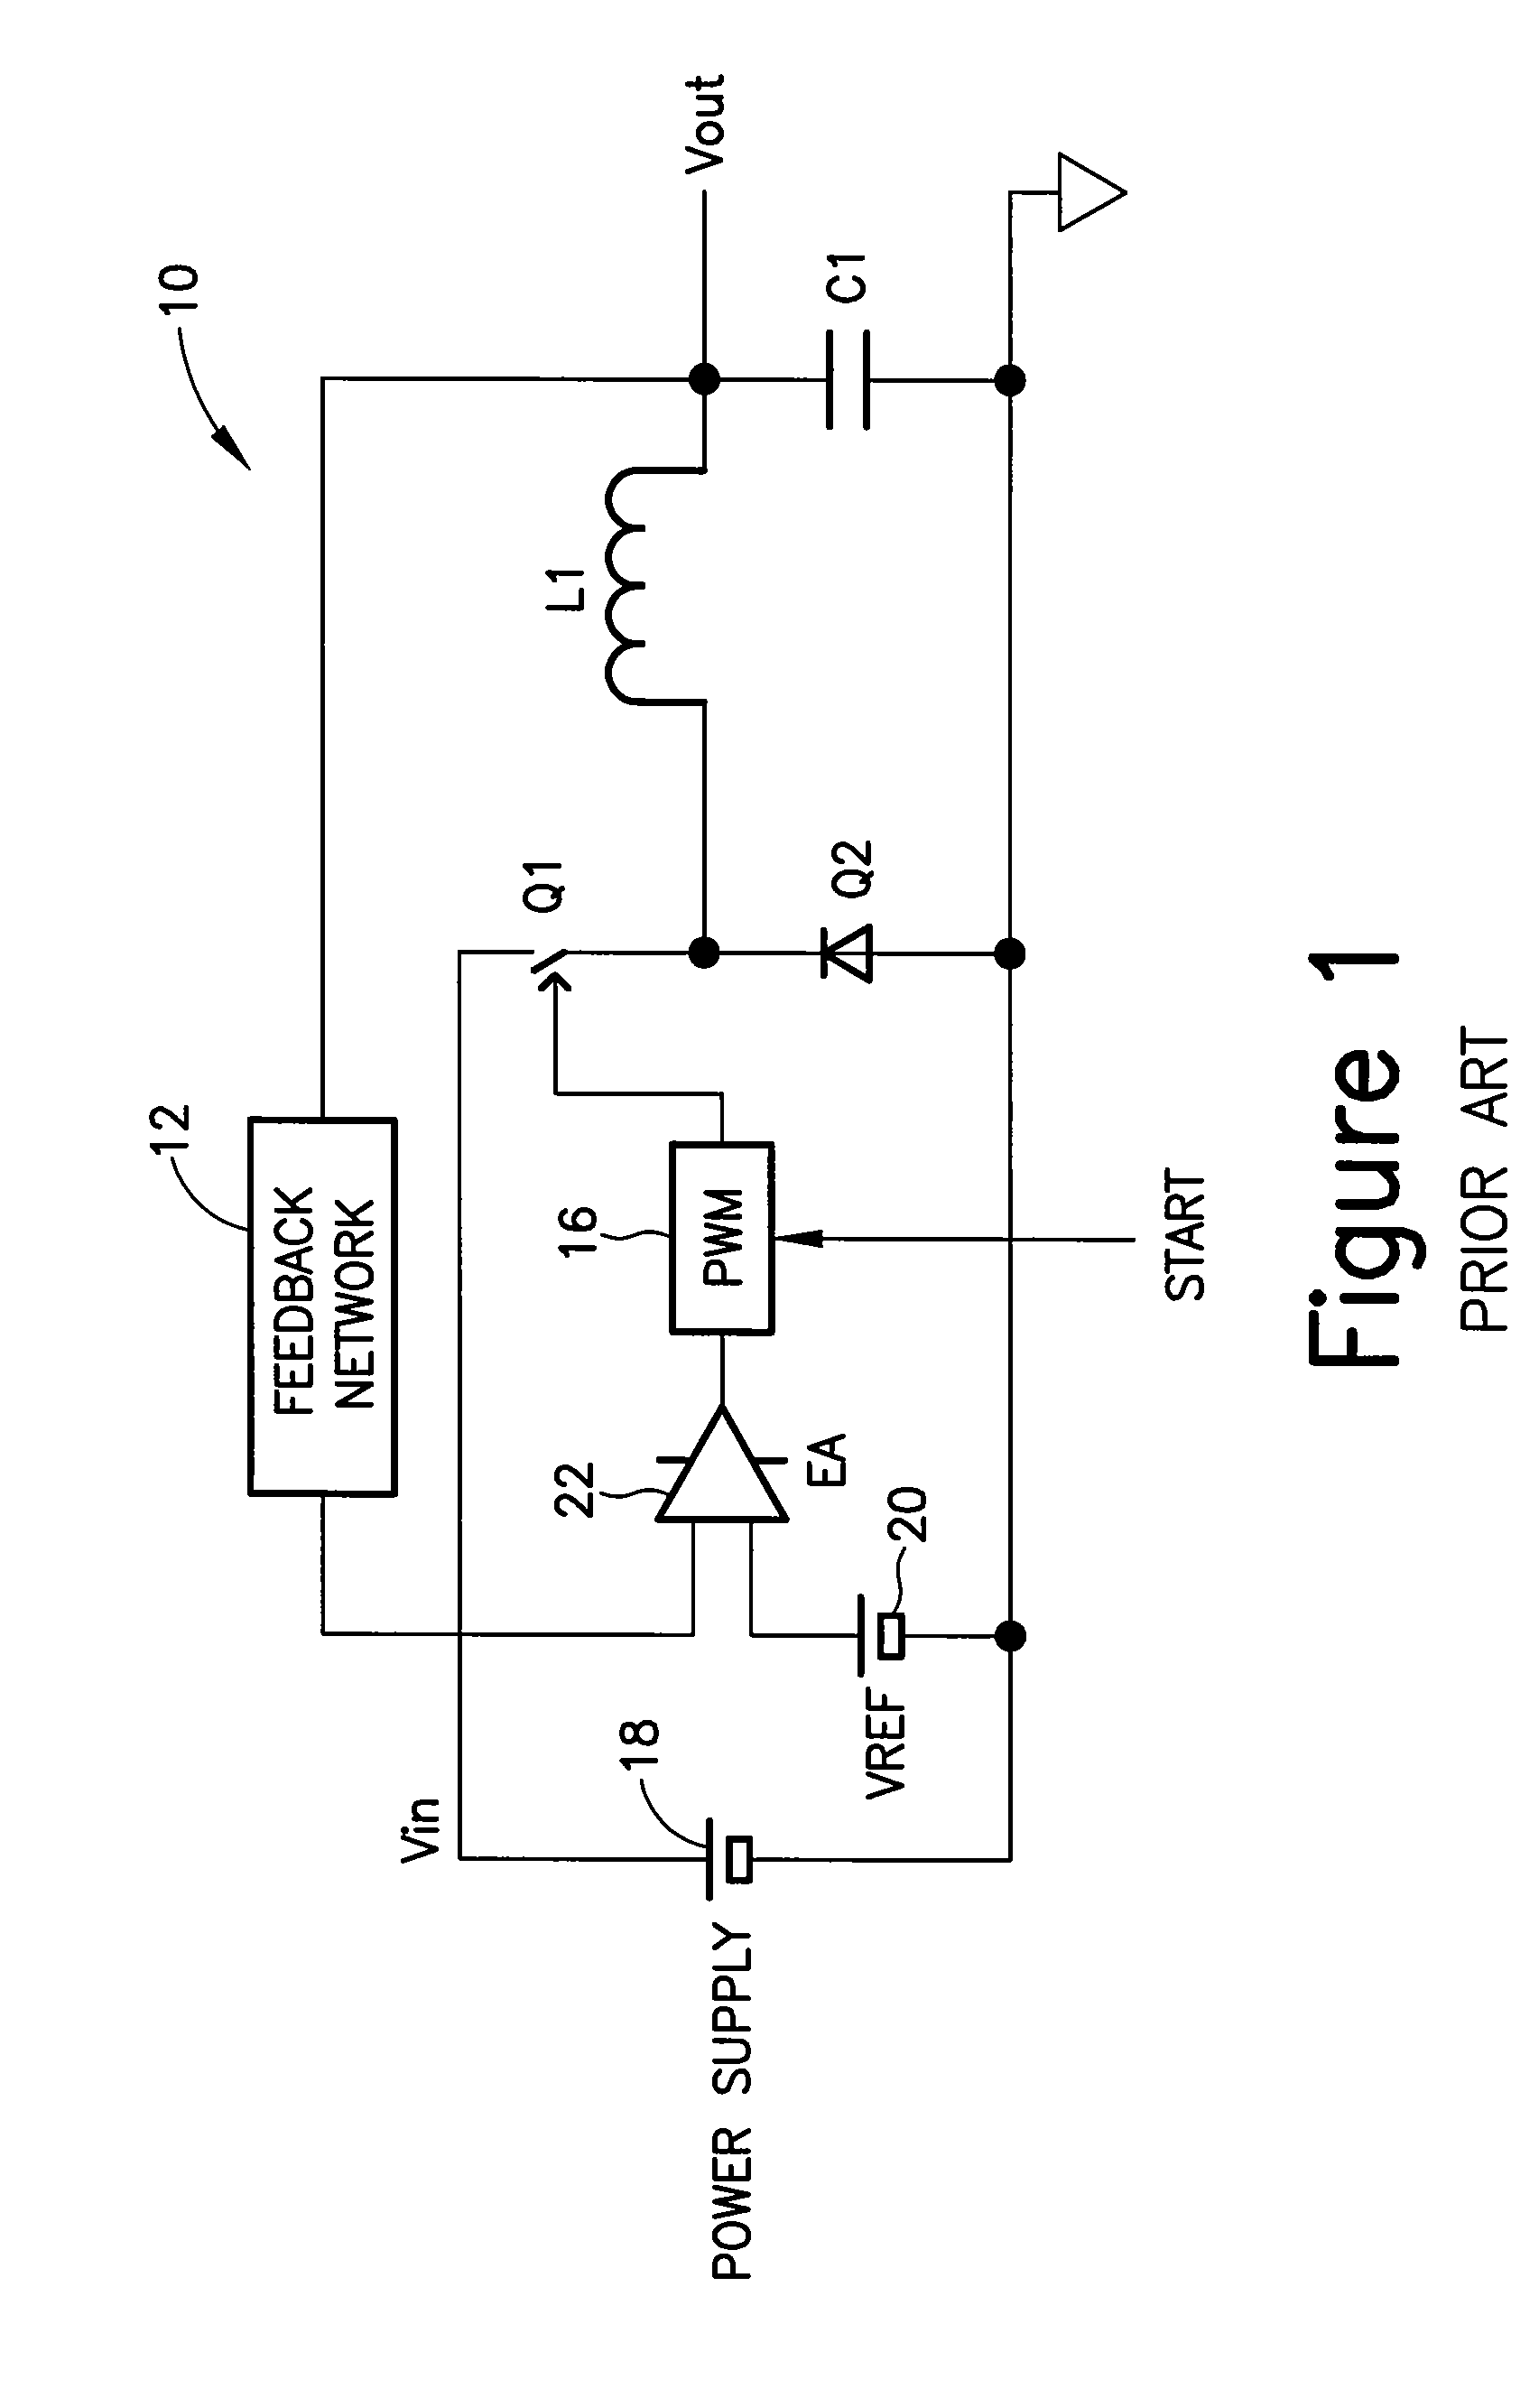 Method to reduce inrush voltage and current in a switching power converter